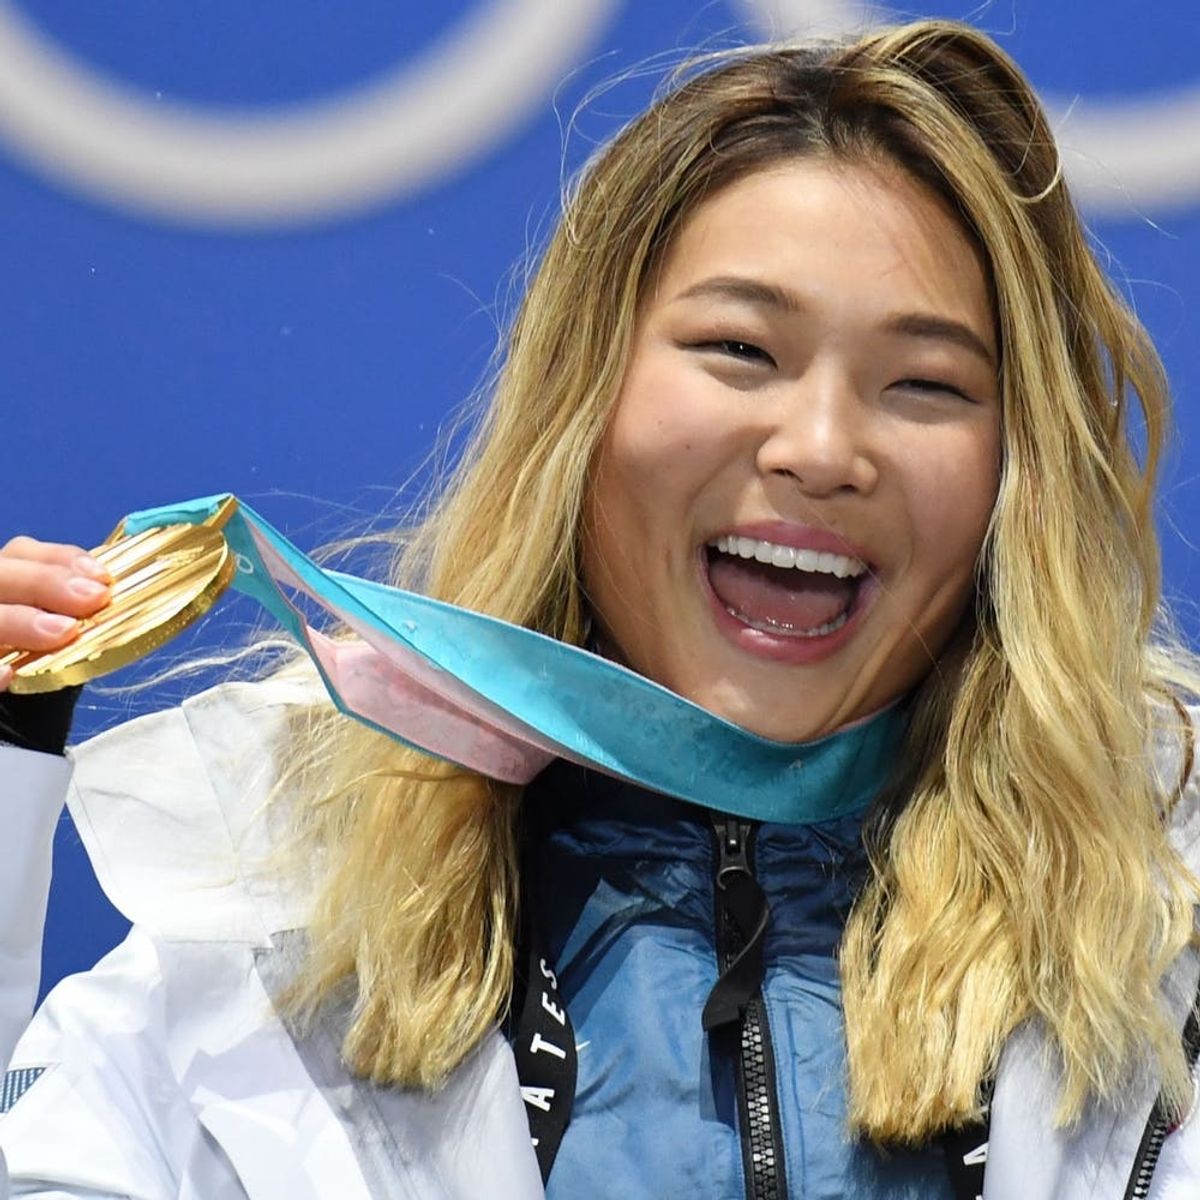 7 Reasons We Can’t Get Enough of Olympic Gold Medal Snowboarder Chloe Kim